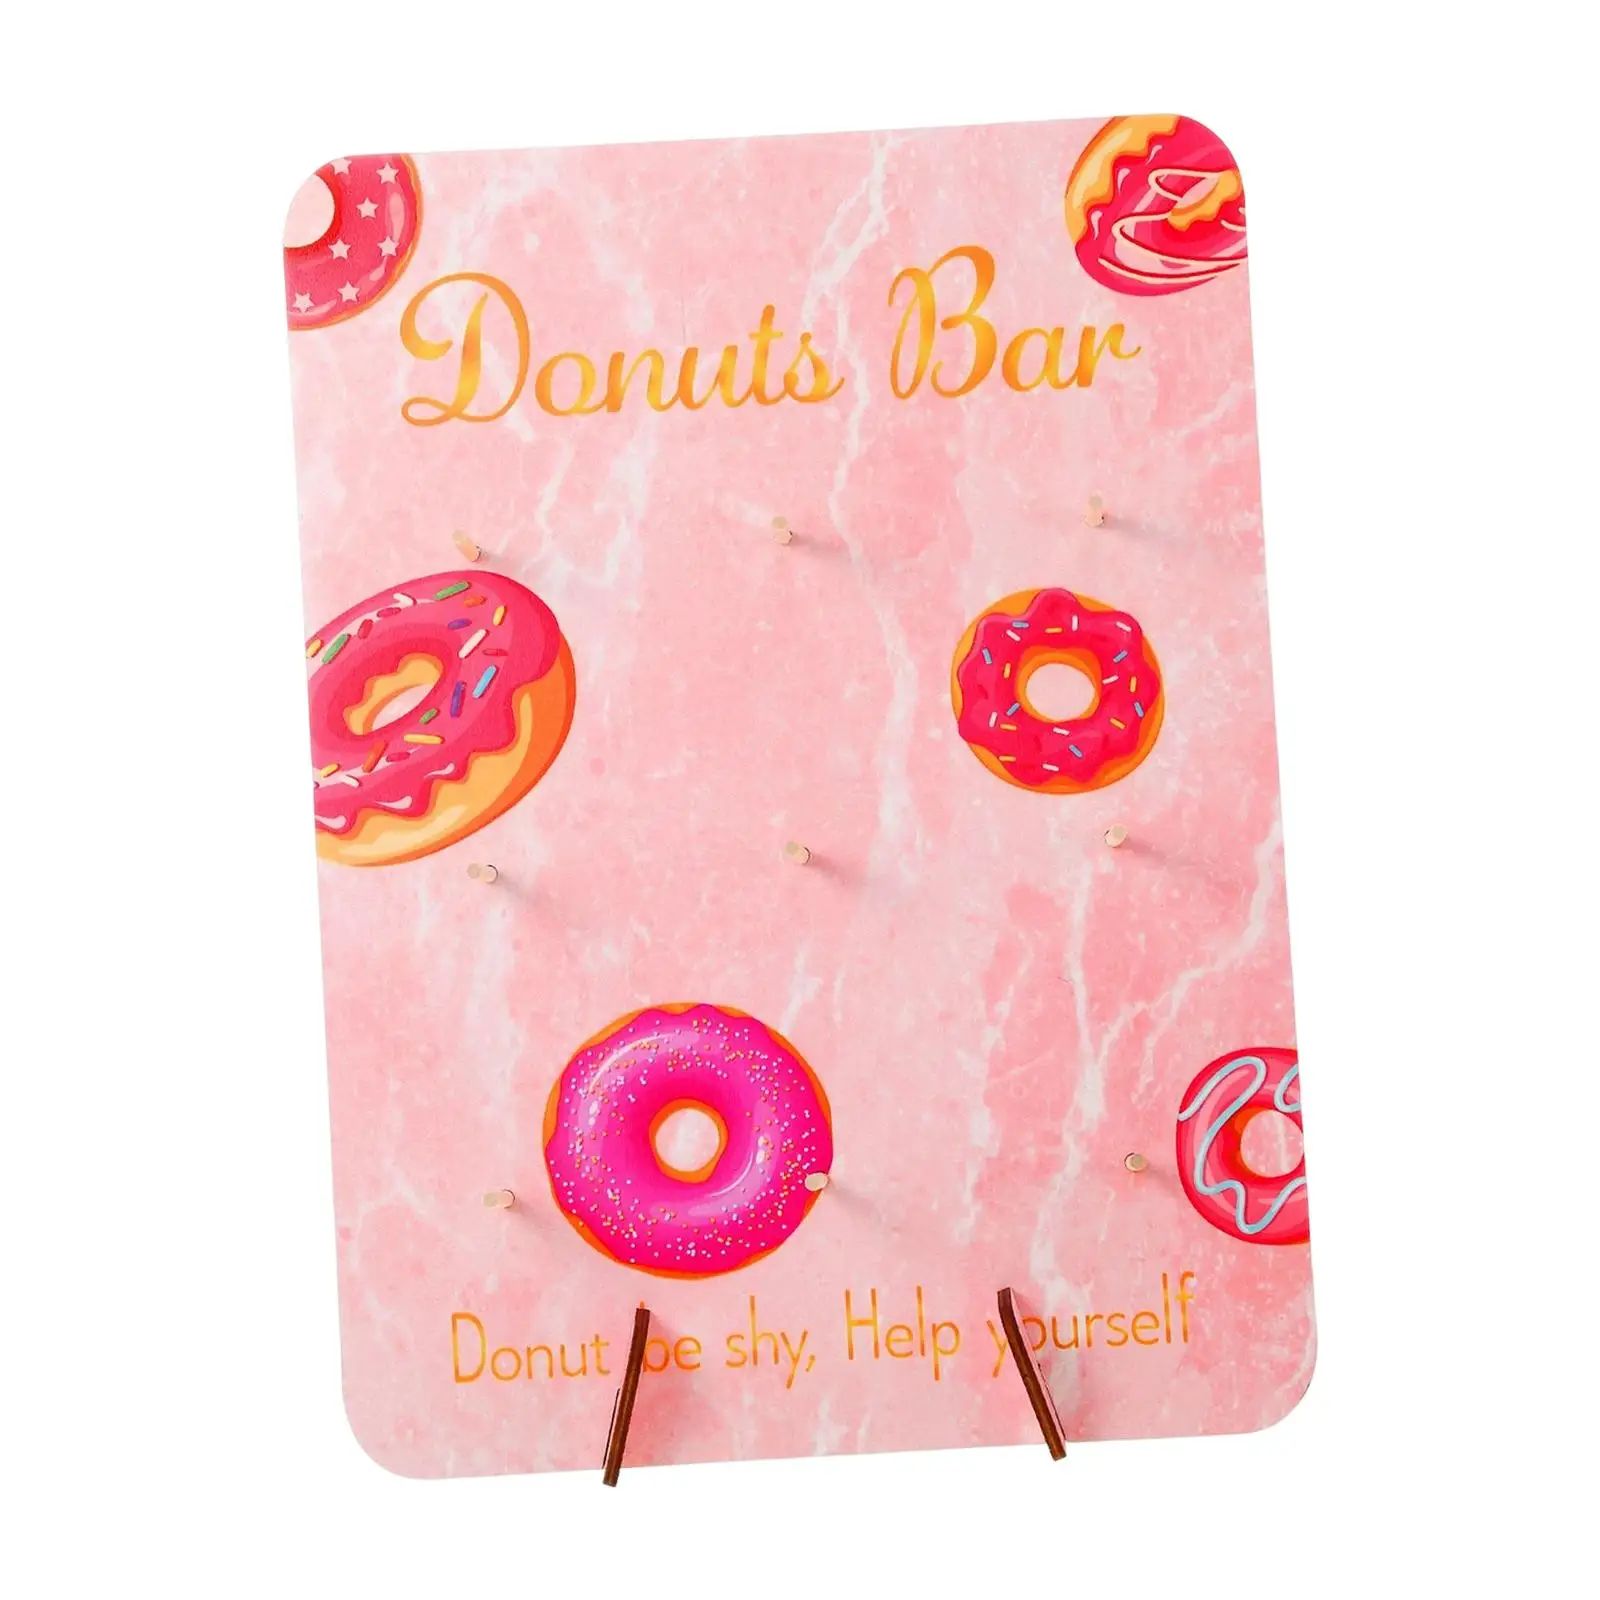 Reusable Donut Wall Stand Rustic Doughnut Board Holder for Baby Showers Donut Party Supplies Bridal Shower Birthday Decorations